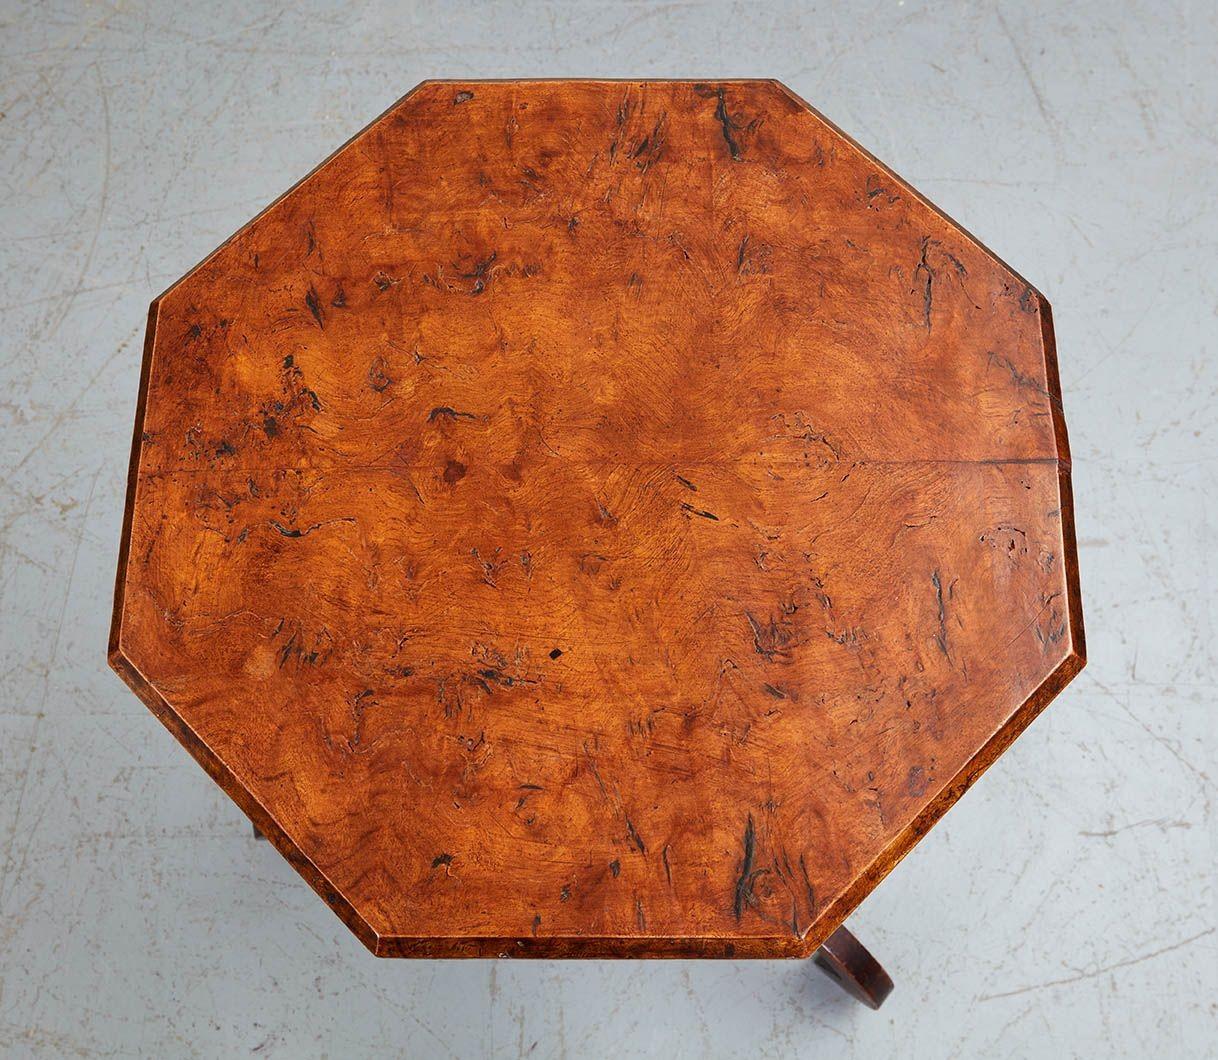 Good early 19th Century English country Regency octagonal wine table, the solid book-matched burl elm top with traces of parcel gilt on chamfered edge, standing on pencil chamfered shaft, the three scrolled legs joined to knotched base, the whole